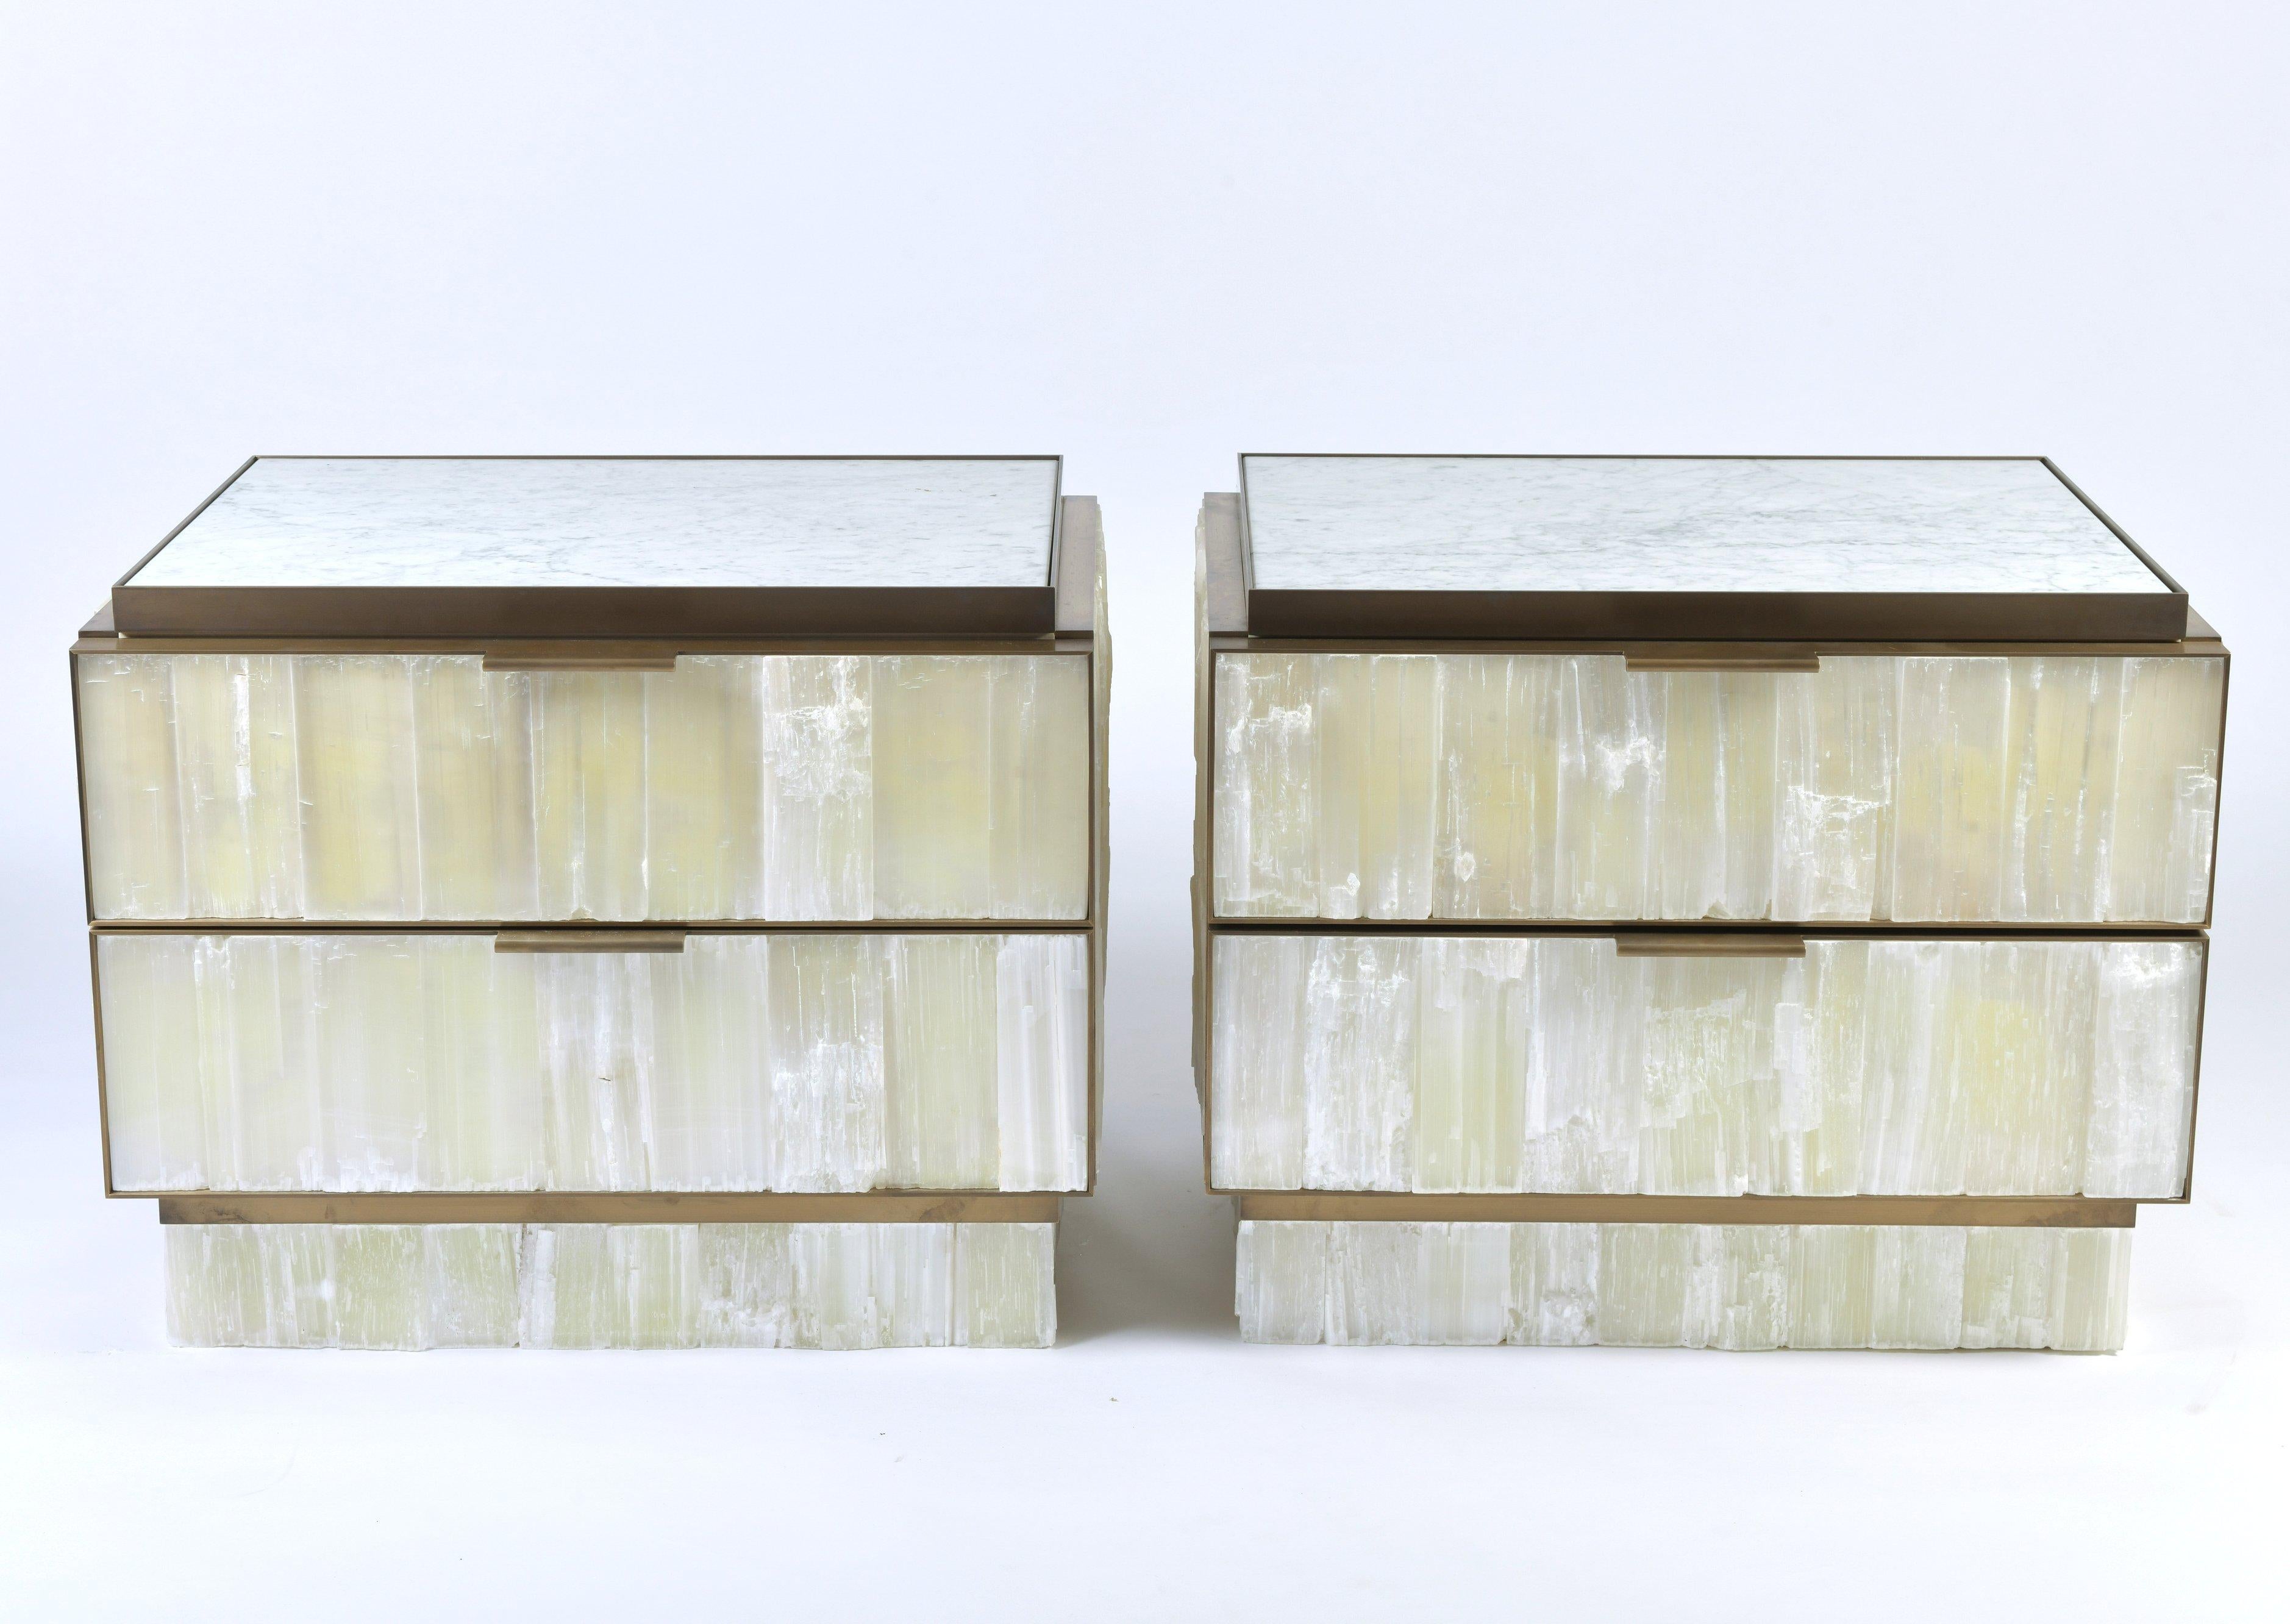 These stunning and top quality stalactite crystal bedside cabinets features 2 drawers supported on a plinth base with bronze metalwork. The dark veined white marble top is interchangeable if required. Each cabinet measures 26 in – 66 cm wide, 19 in